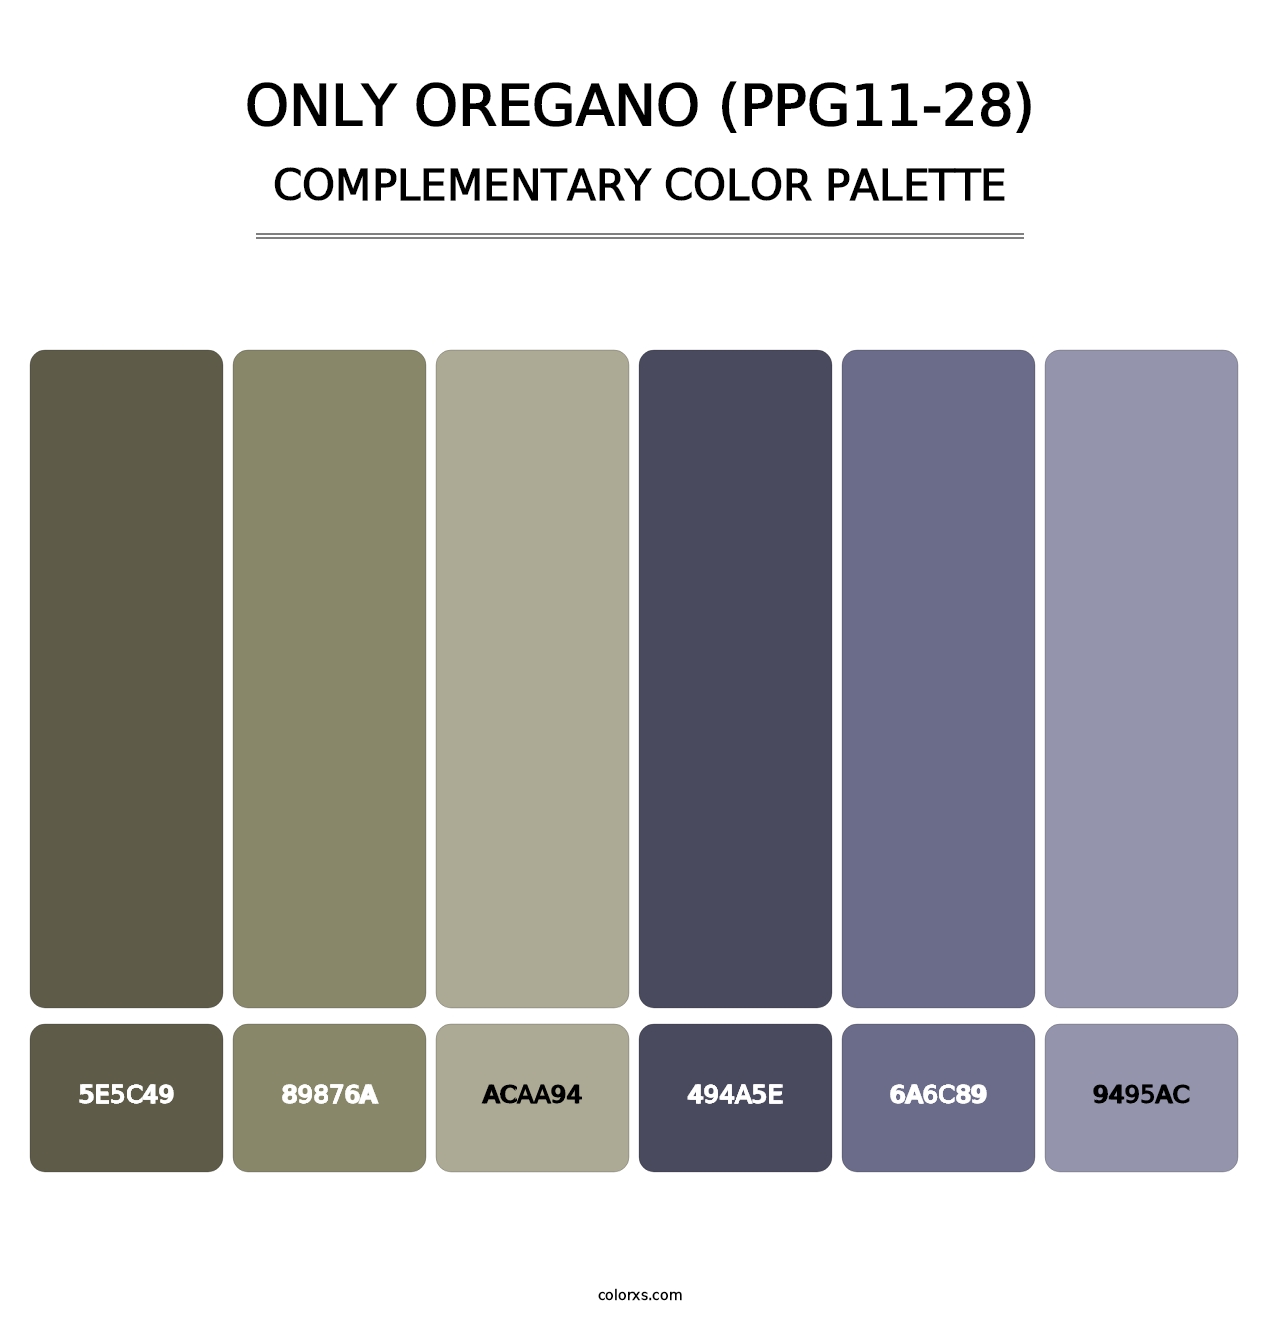 Only Oregano (PPG11-28) - Complementary Color Palette